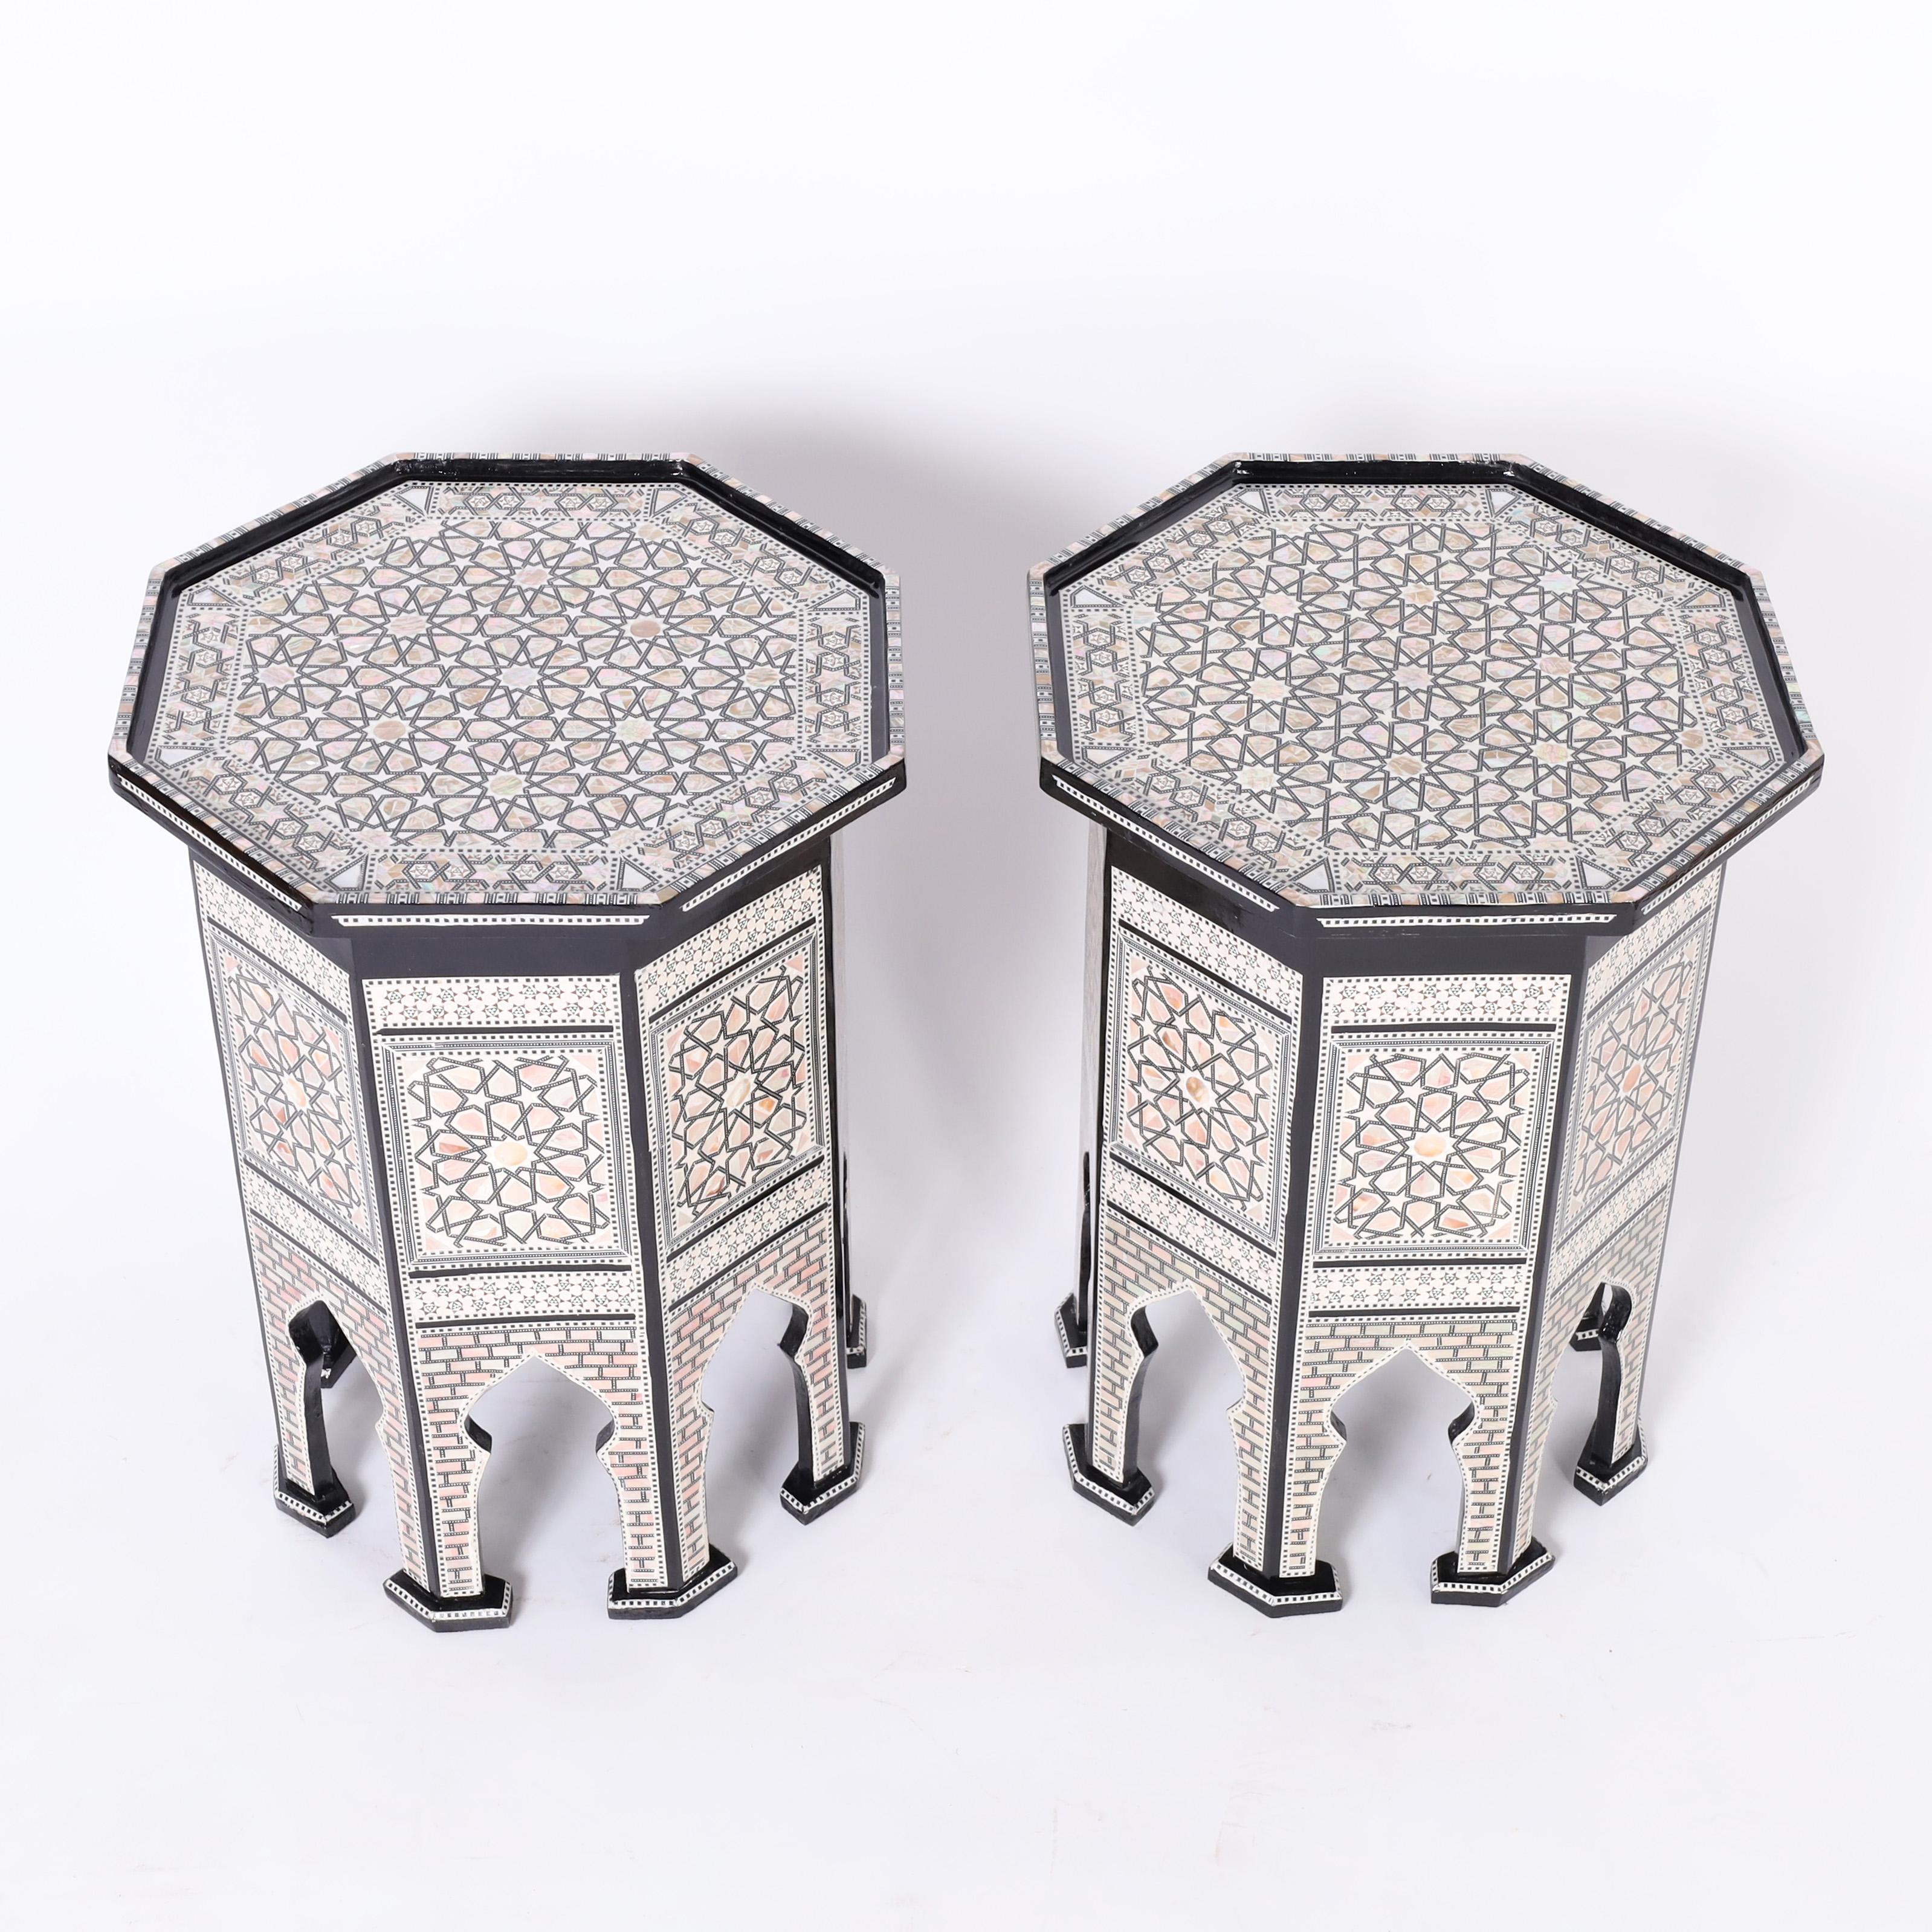 Standout pair of vintage Moroccan stands elaborately decorated in mother of pearl, ebony, and bone marquetry, having classic moorish octagon forms with architecturally interesting arched legs and featuring secret compartments lined in red velvet. 